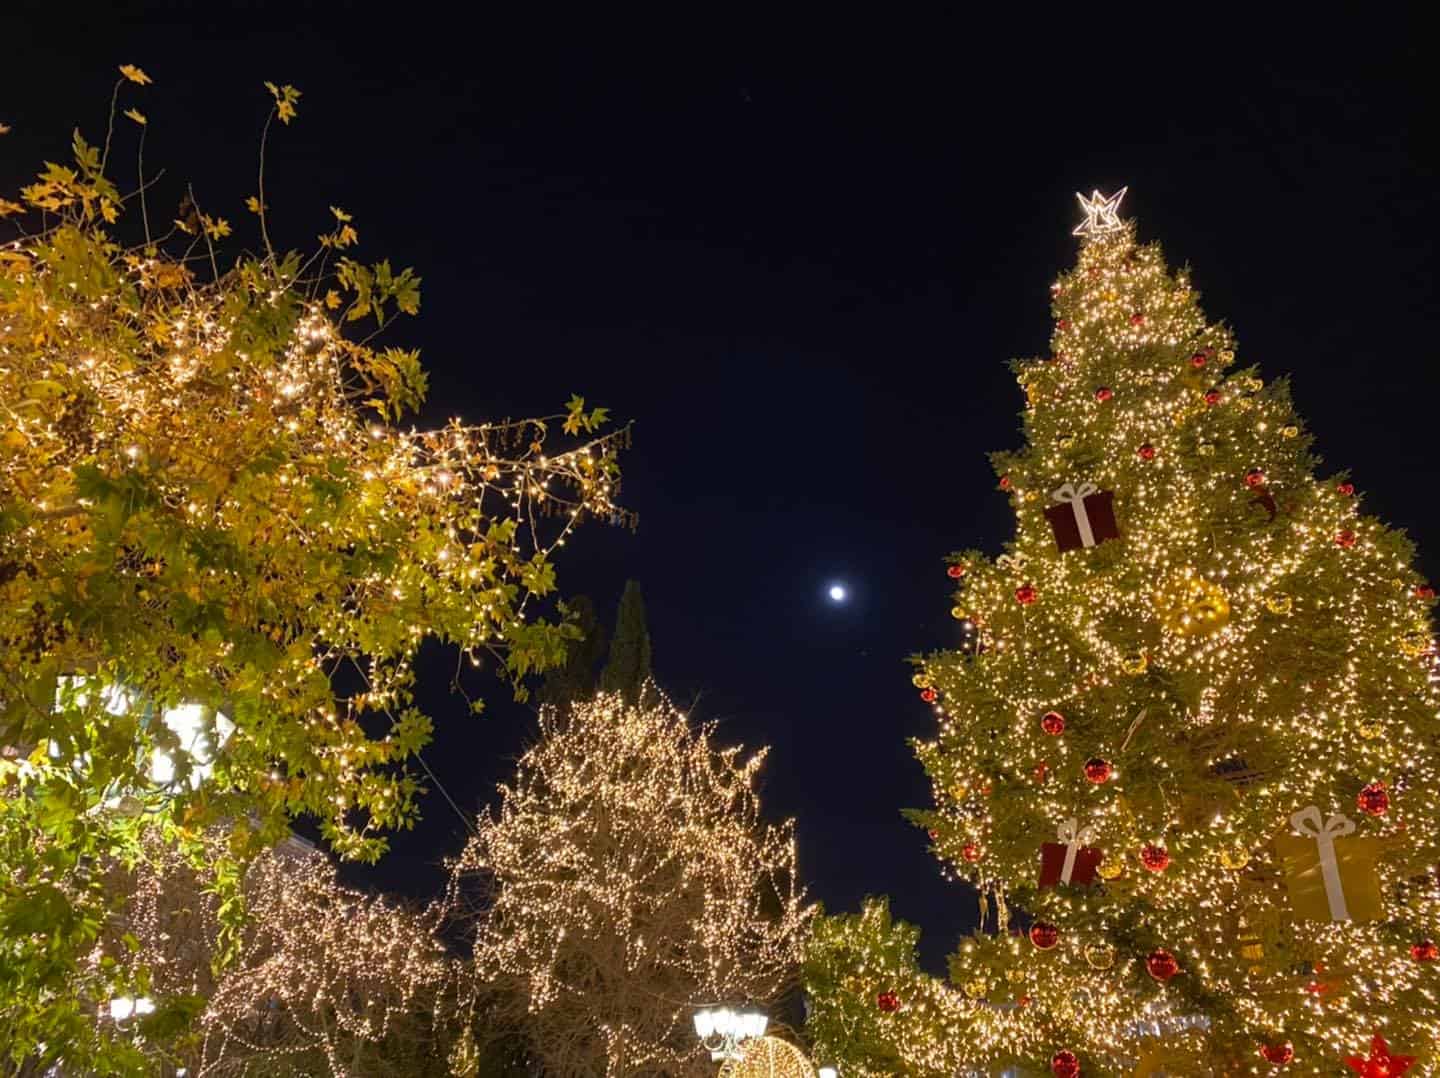 Athens Christmas decorations at Syntagma Square on December 16, 2021. © Greek City Times.